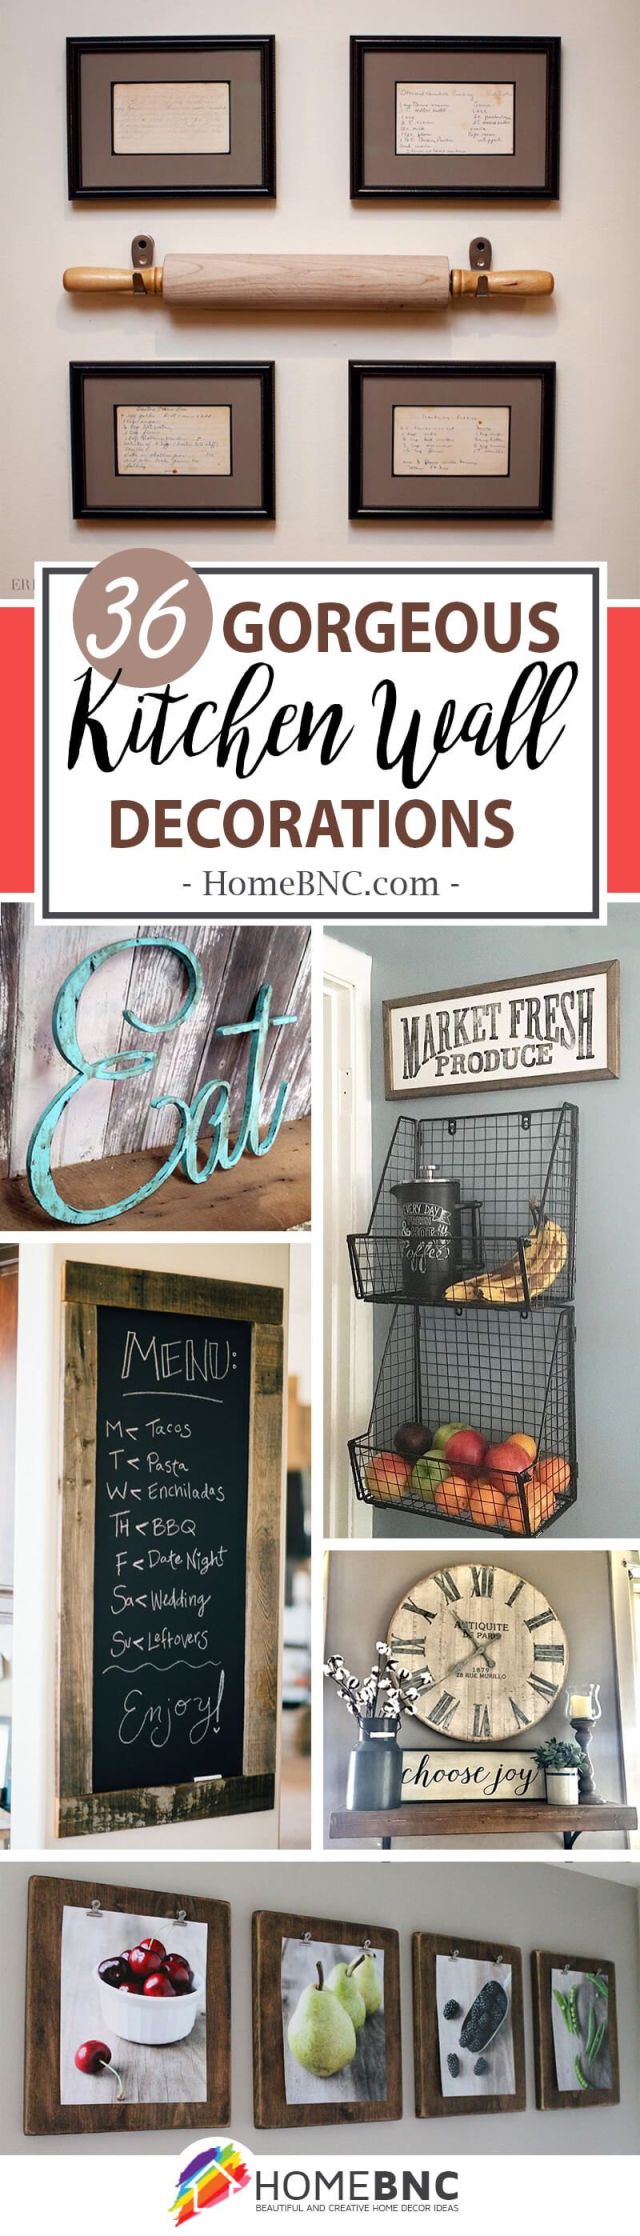 Pretty Kitchen Wall Decor Ideas to Stir Up Your Blank Walls